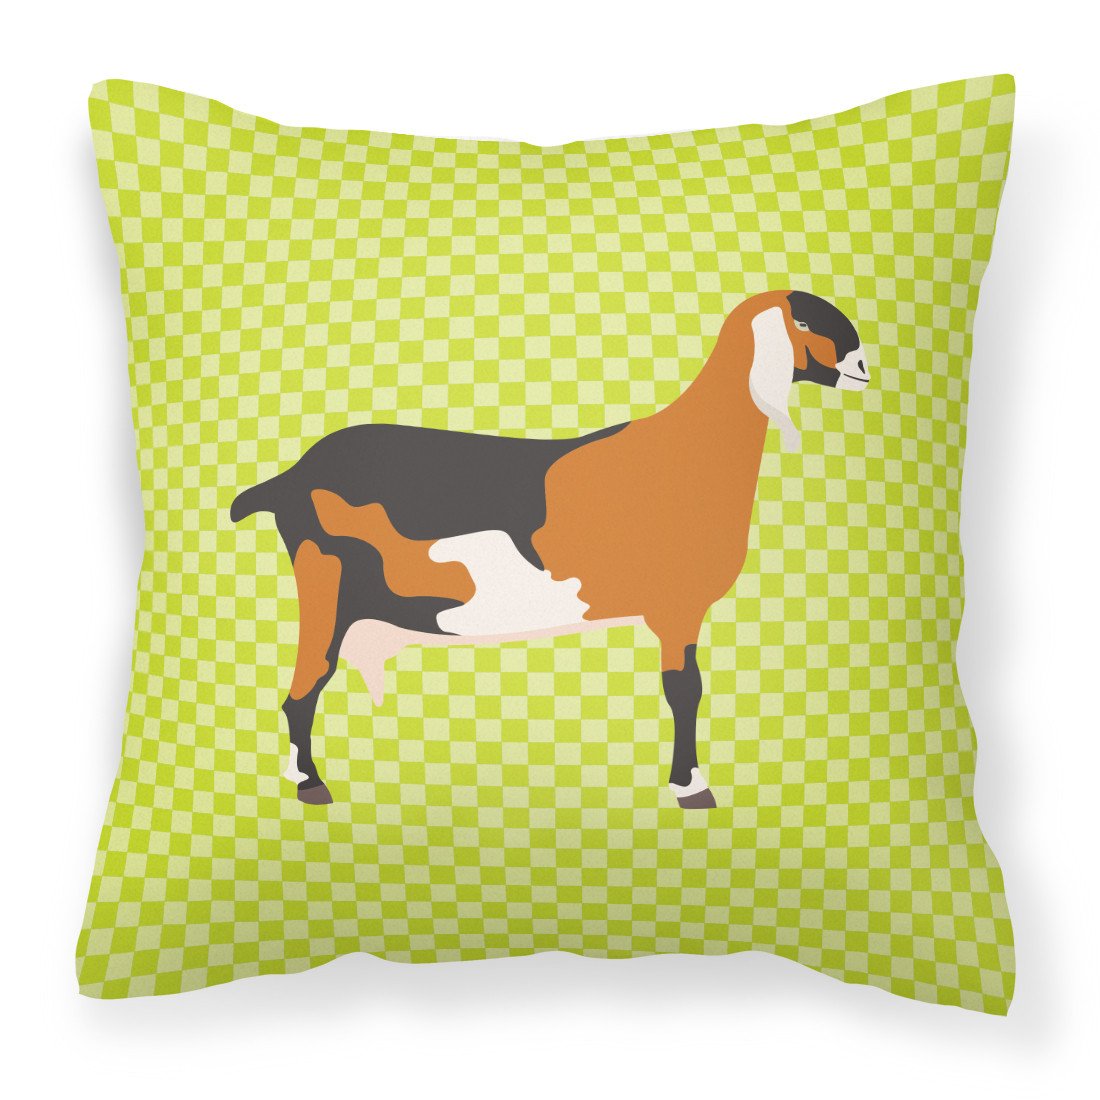 Anglo-nubian Nubian Goat Green Fabric Decorative Pillow BB7709PW1818 by Caroline's Treasures